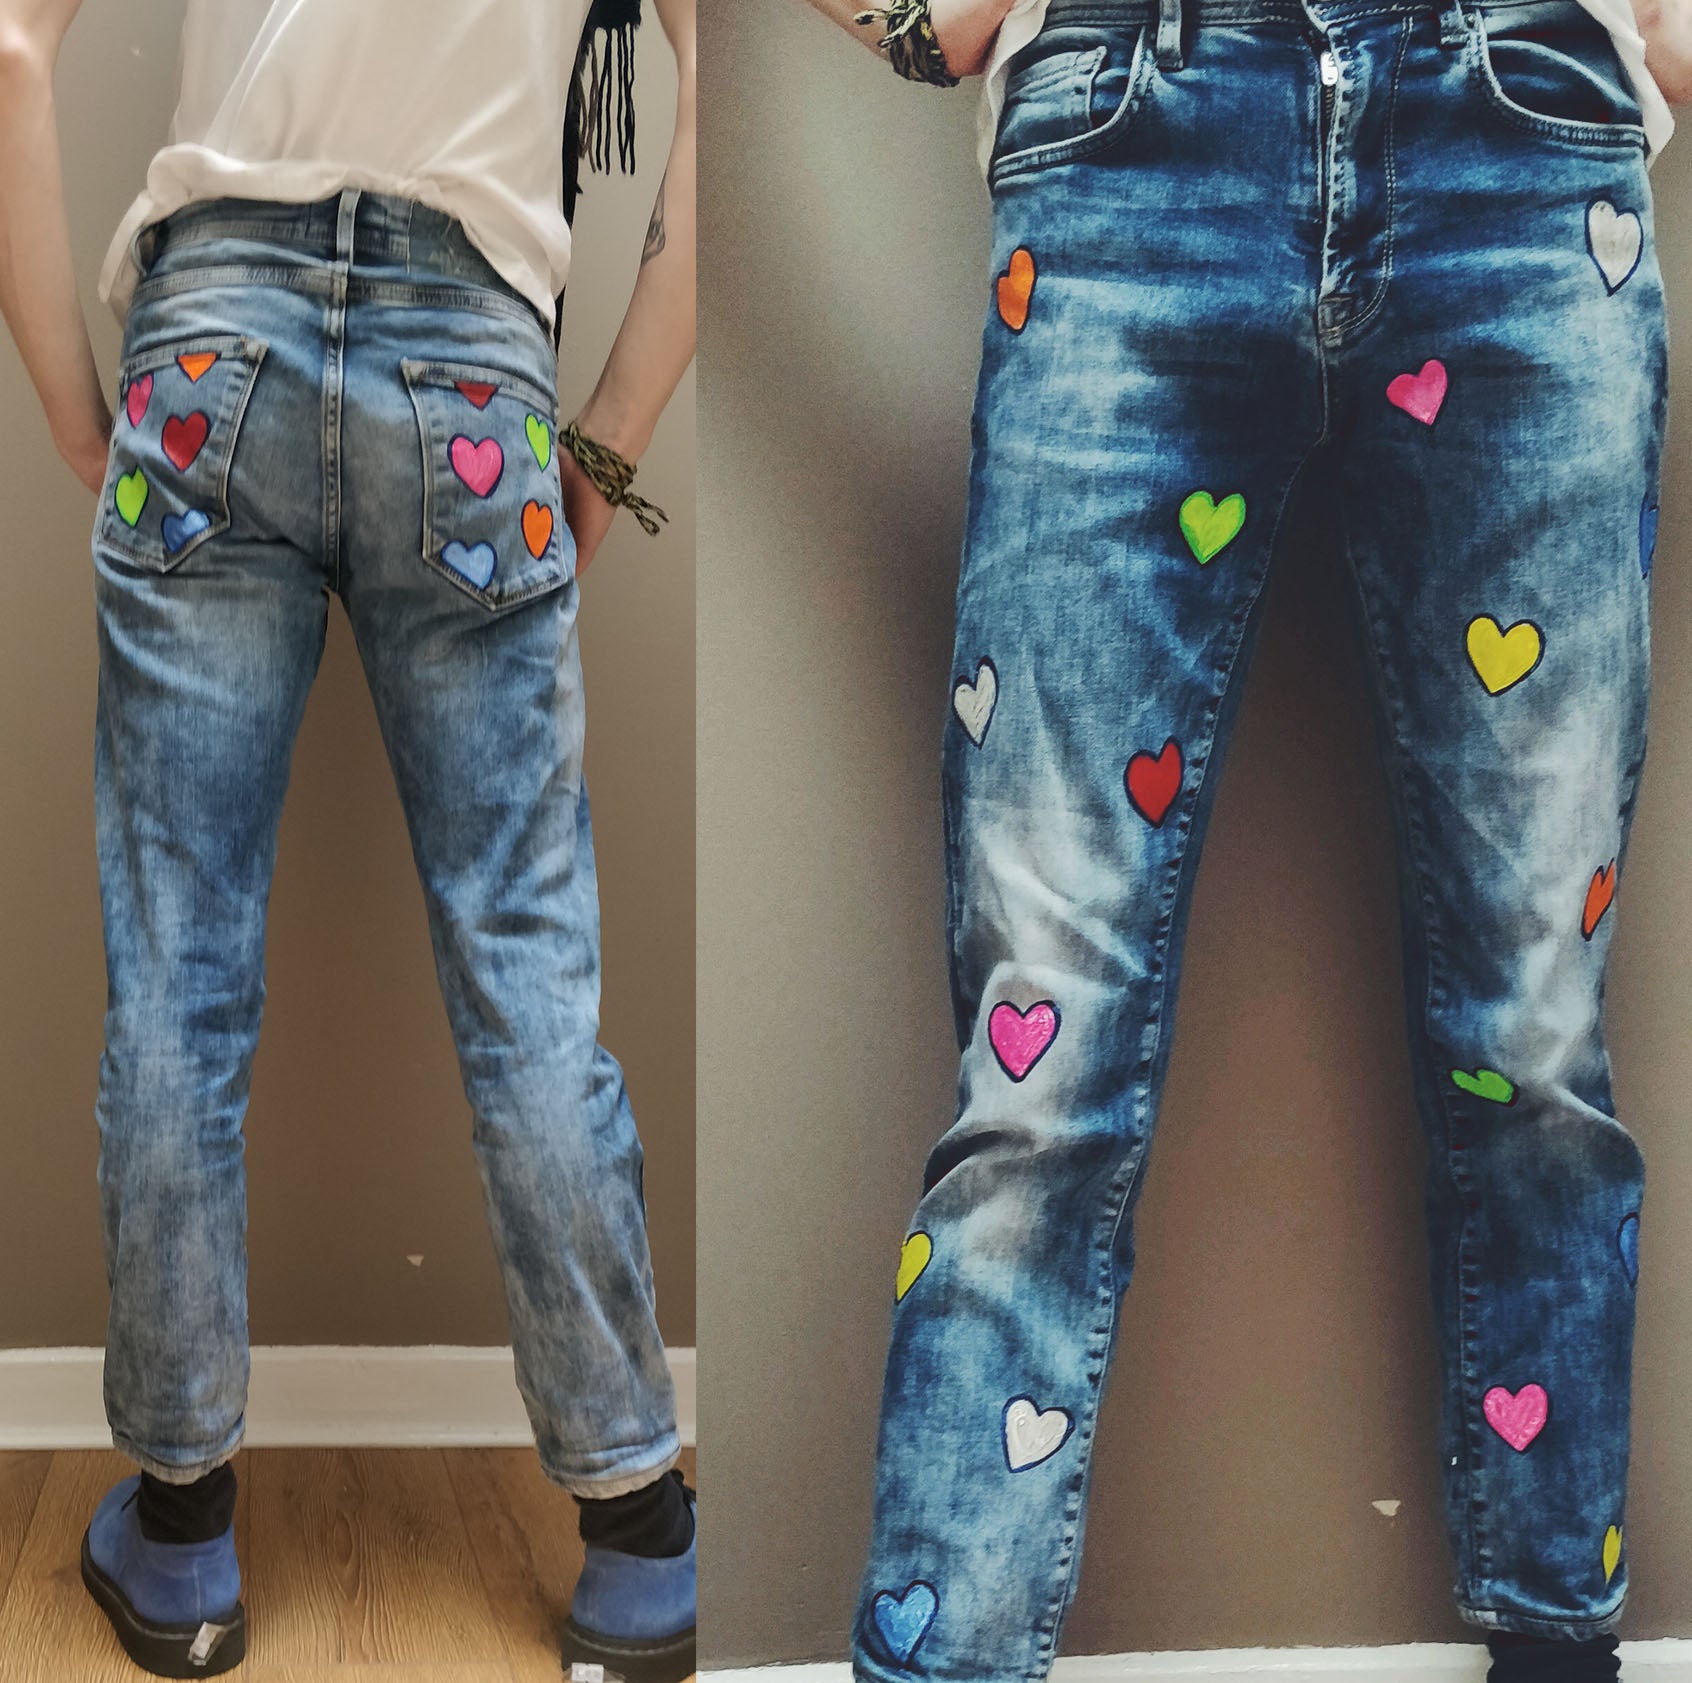 Custom Hand-Painted Denim Jeans (You Supply The Jeans)